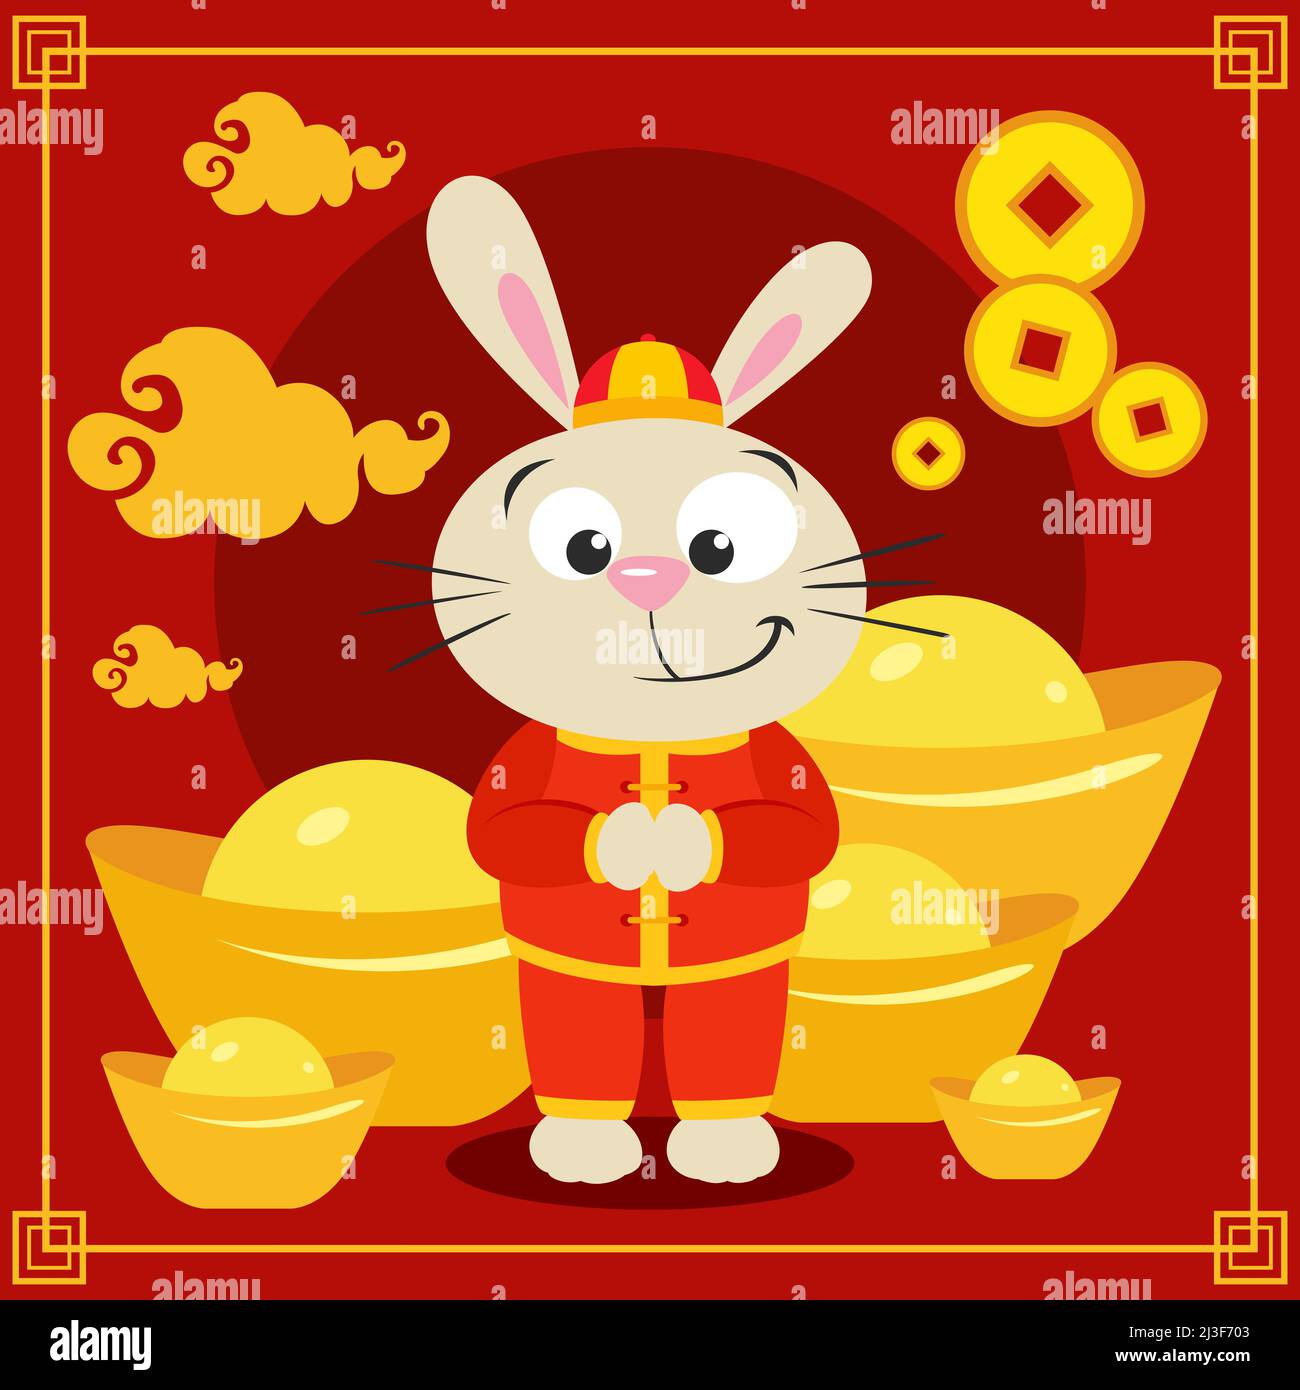 Greeting card of rabbit happy chinese new year Stock Photo - Alamy